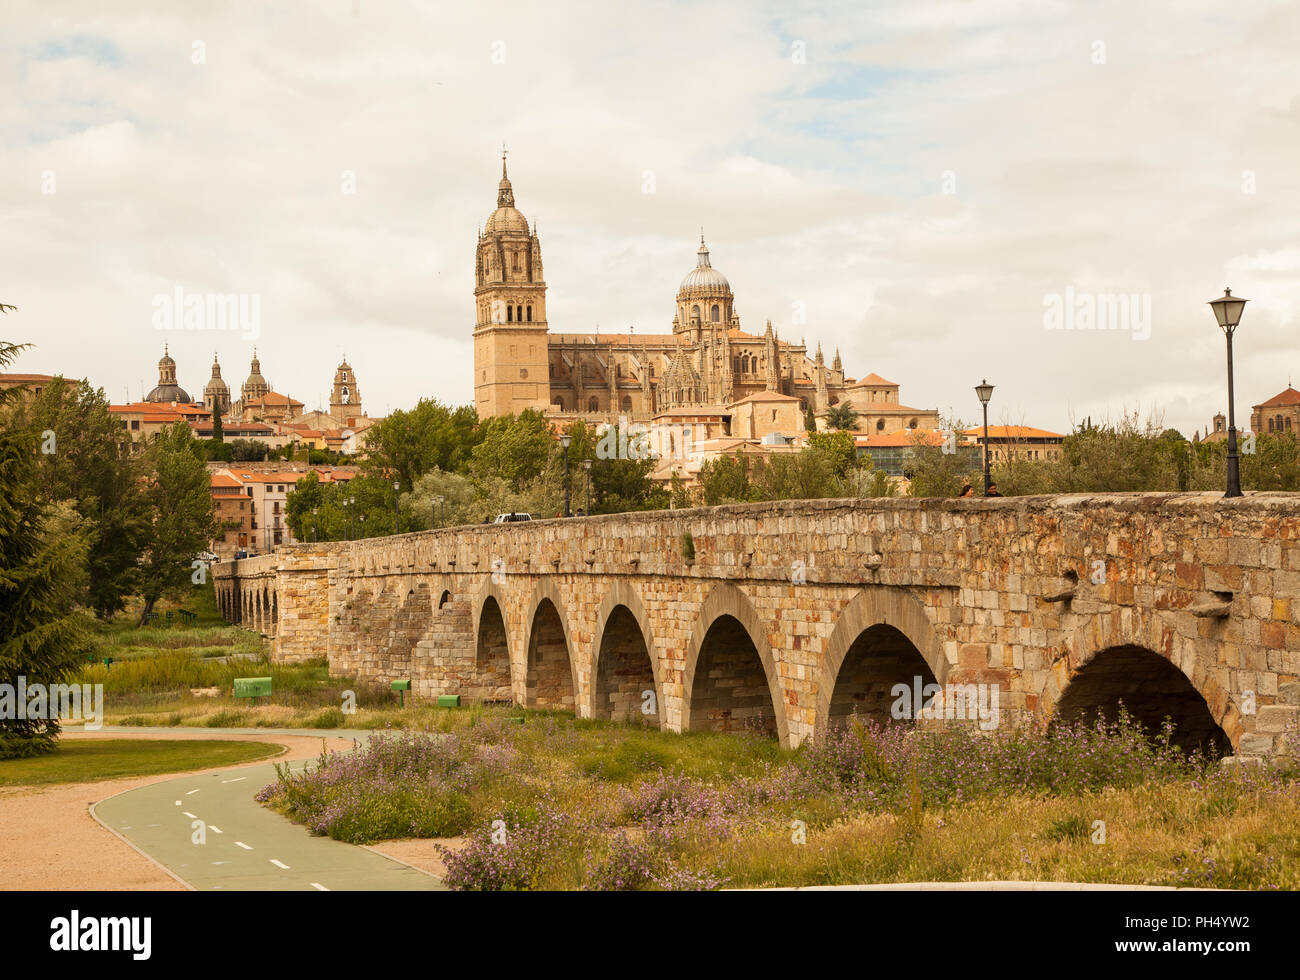 The city of Salamanca a university town with its many historic buildings  seen here over the Roman bridge with a view of the new and old cathedrals Stock Photo